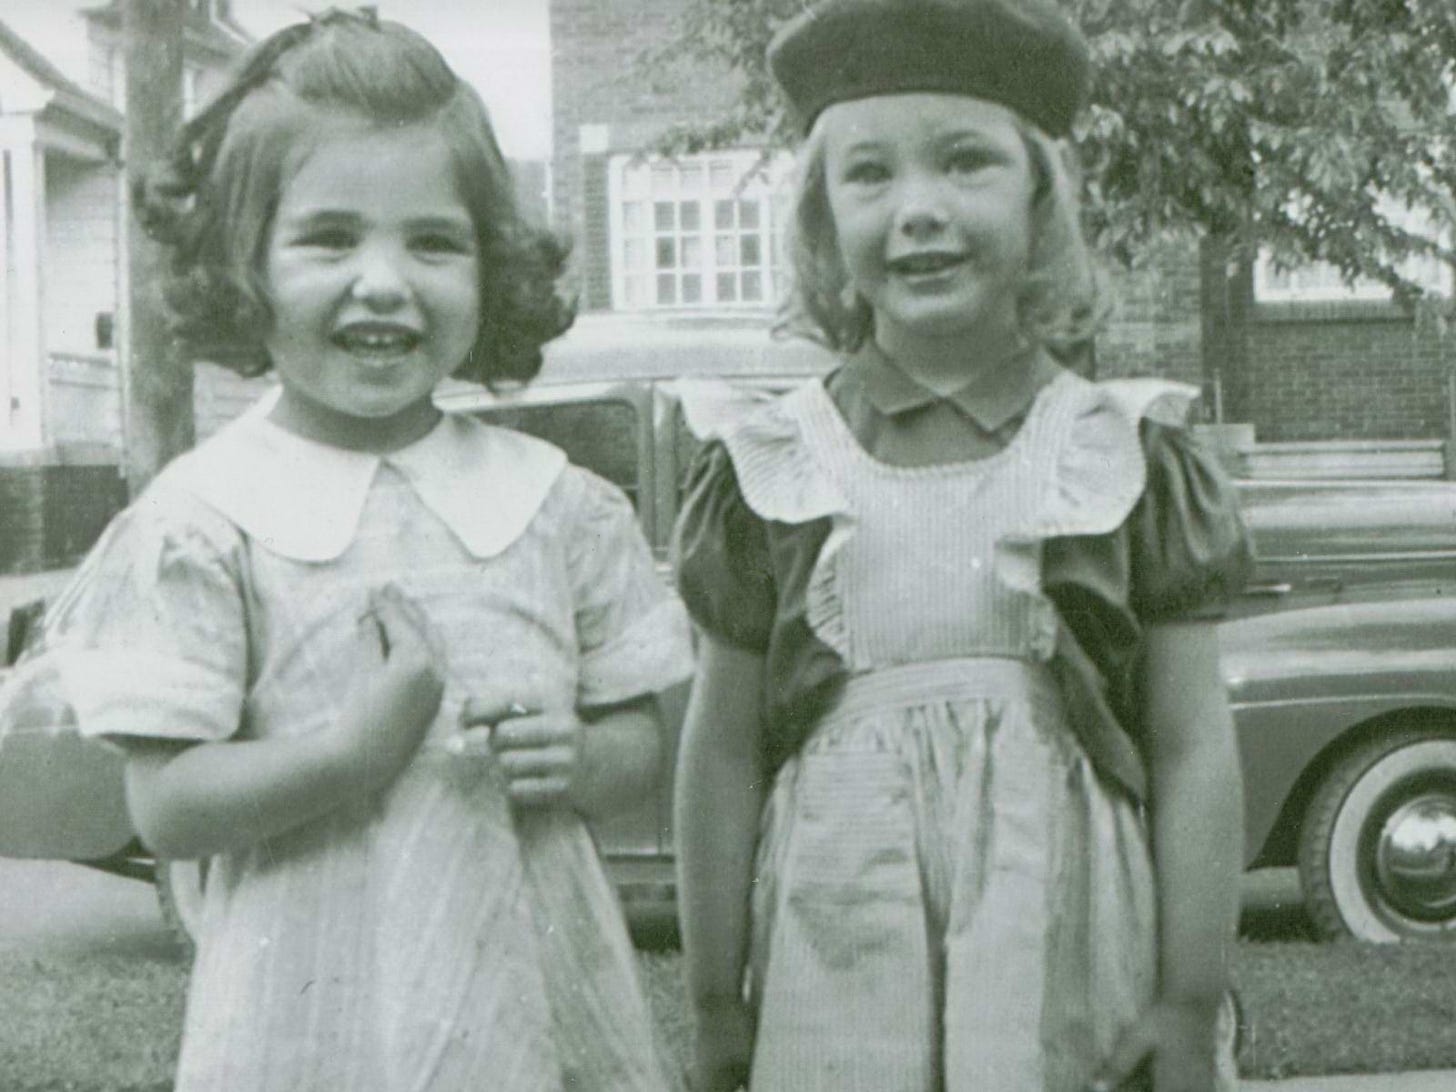 Two little girls standing on a sidewalk smiling